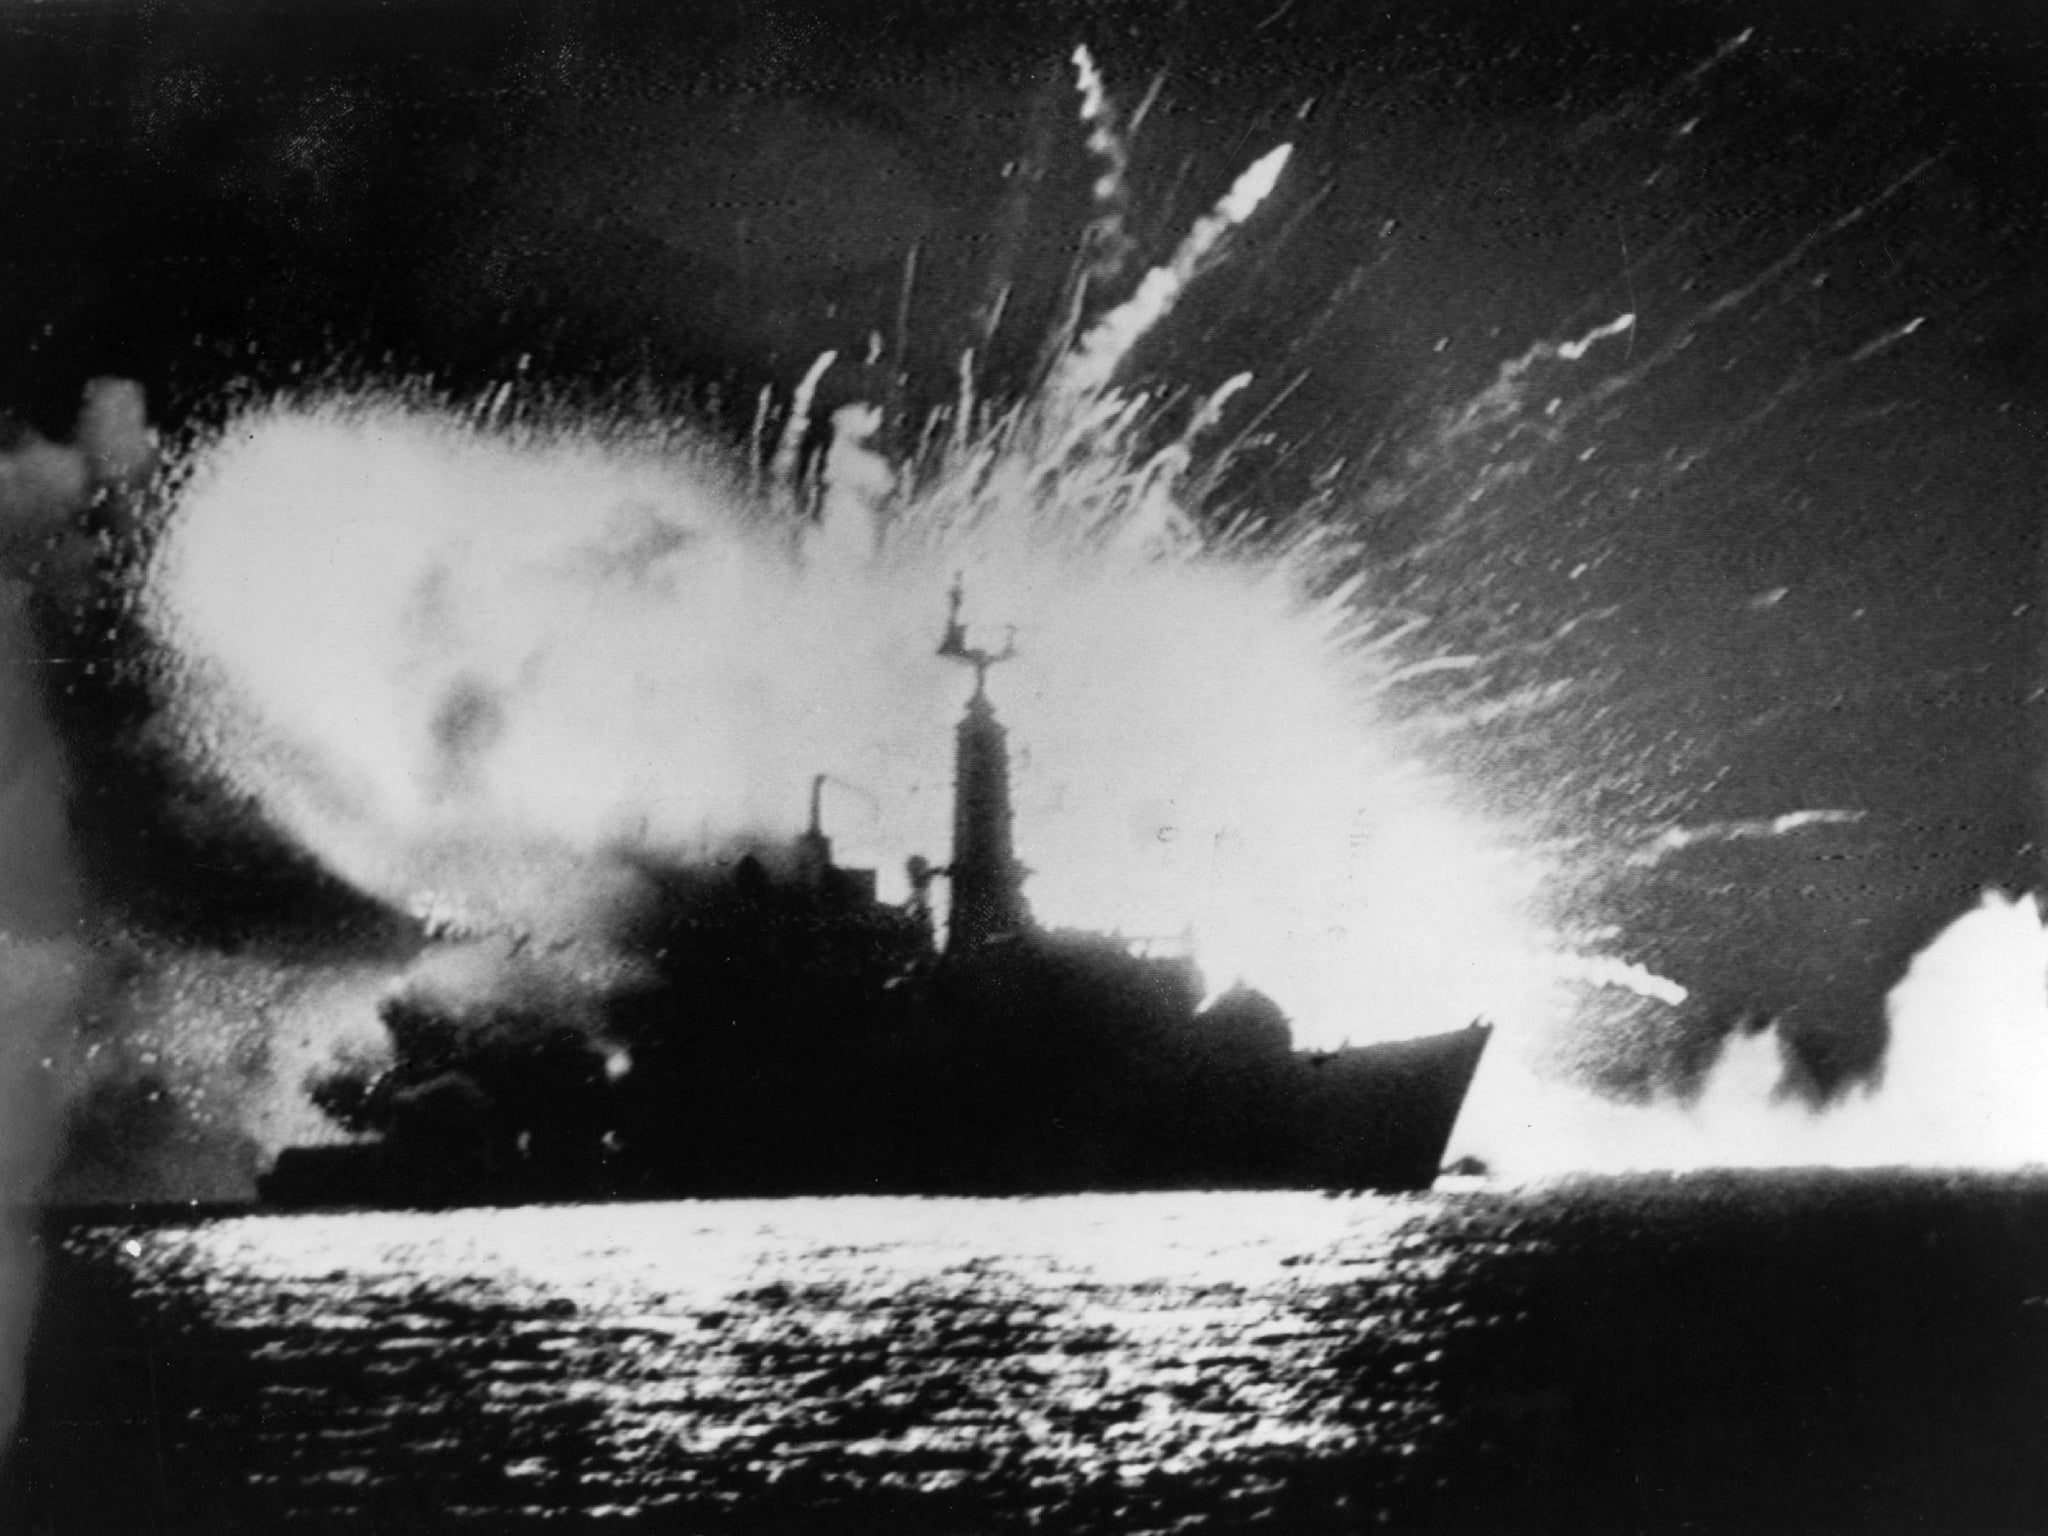 British Royal Navy frigate HMS Antelope explodes after being hit by Skyhawk jets